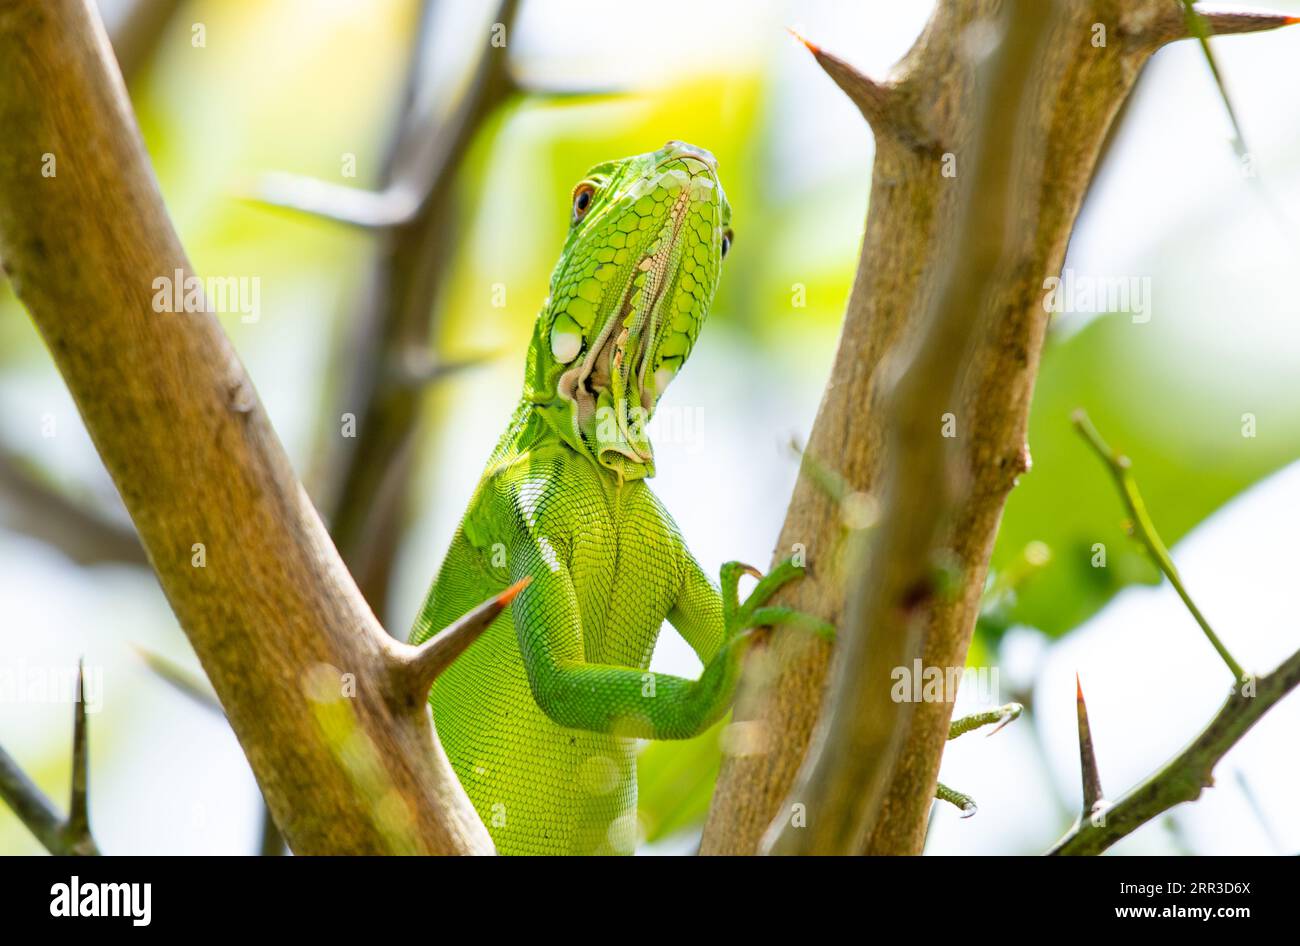 Closeup of scales and head of a baby Green Iguana crawling on a branch in a citrus tree Stock Photo